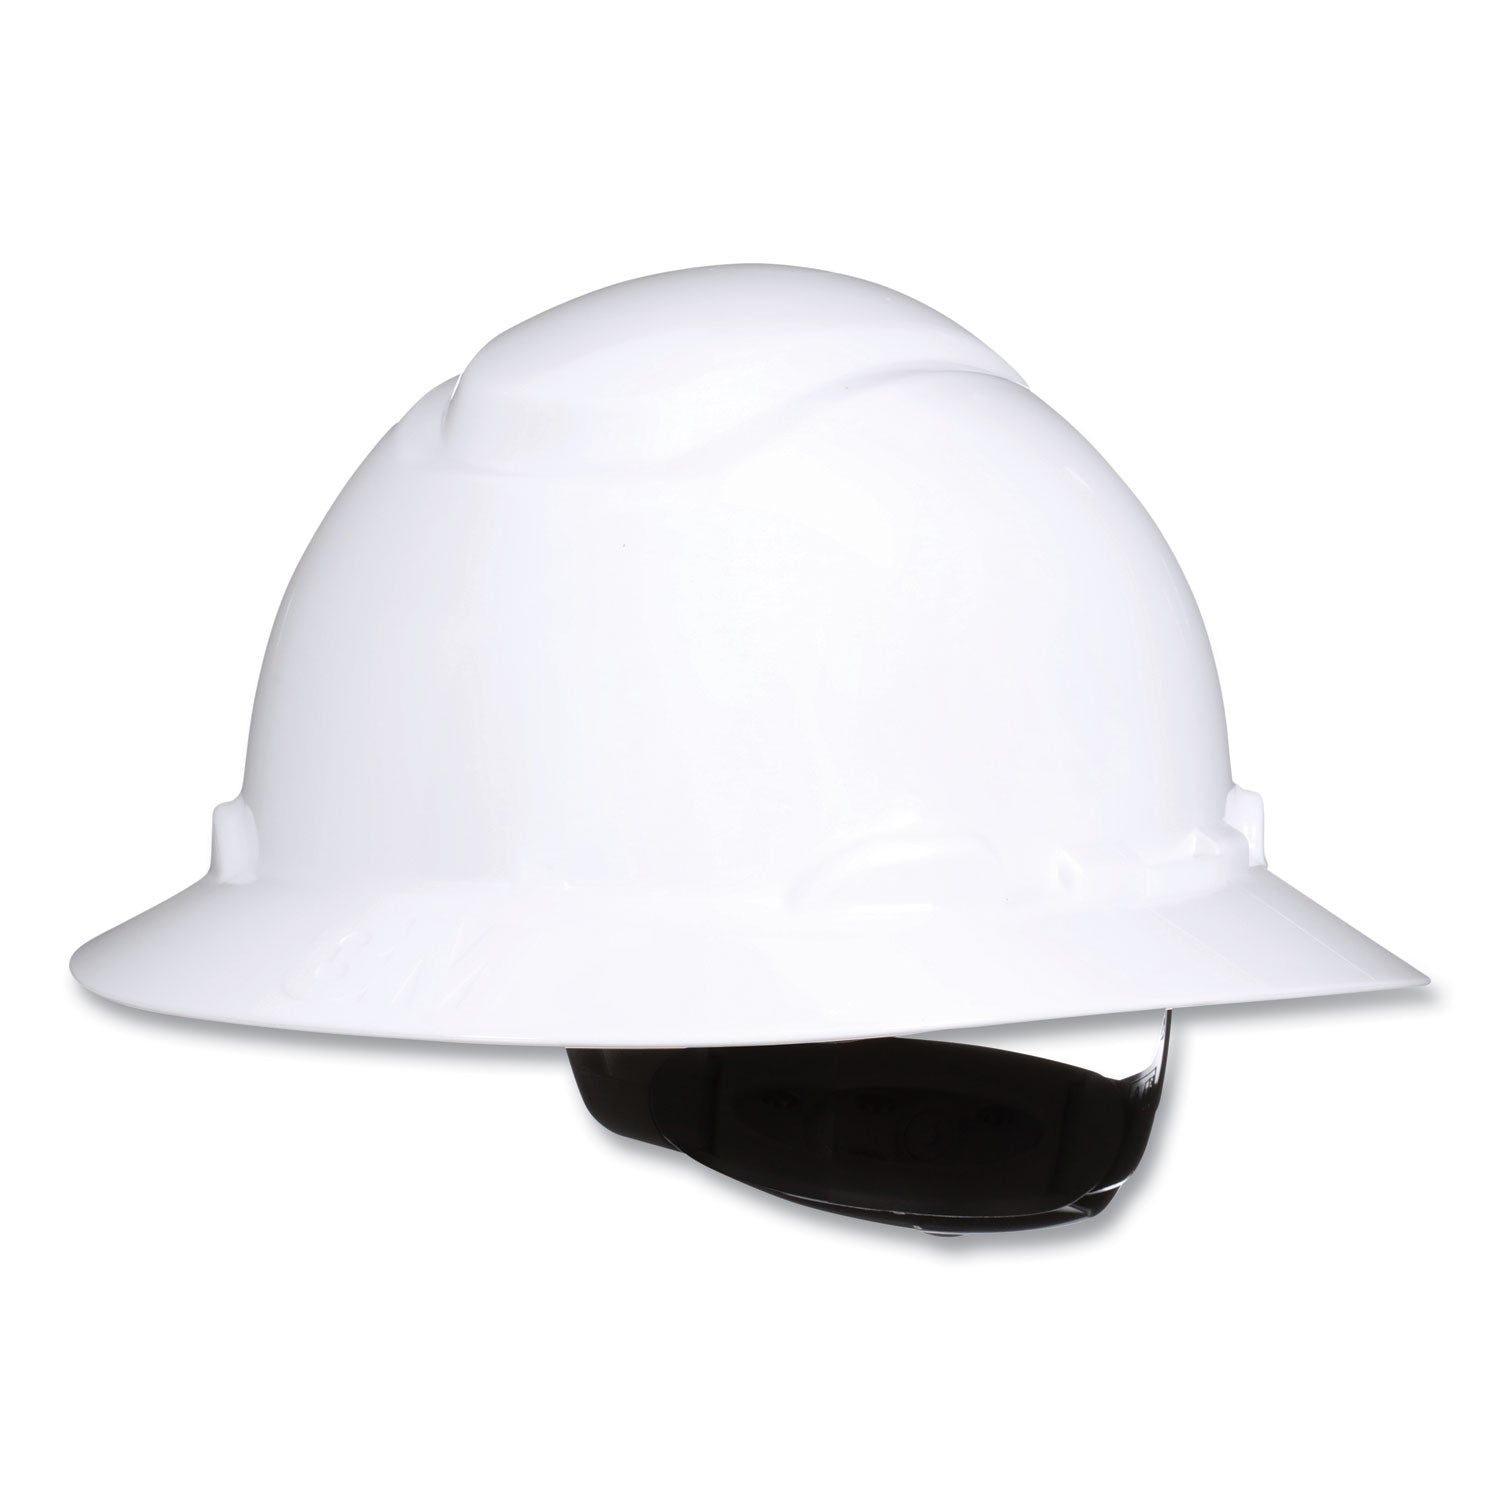 securefit-h-series-hard-hats-h-800-hat-with-uv-indicator-4-point-pressure-diffusion-ratchet-suspension-white_mmmh801sfruv - 4